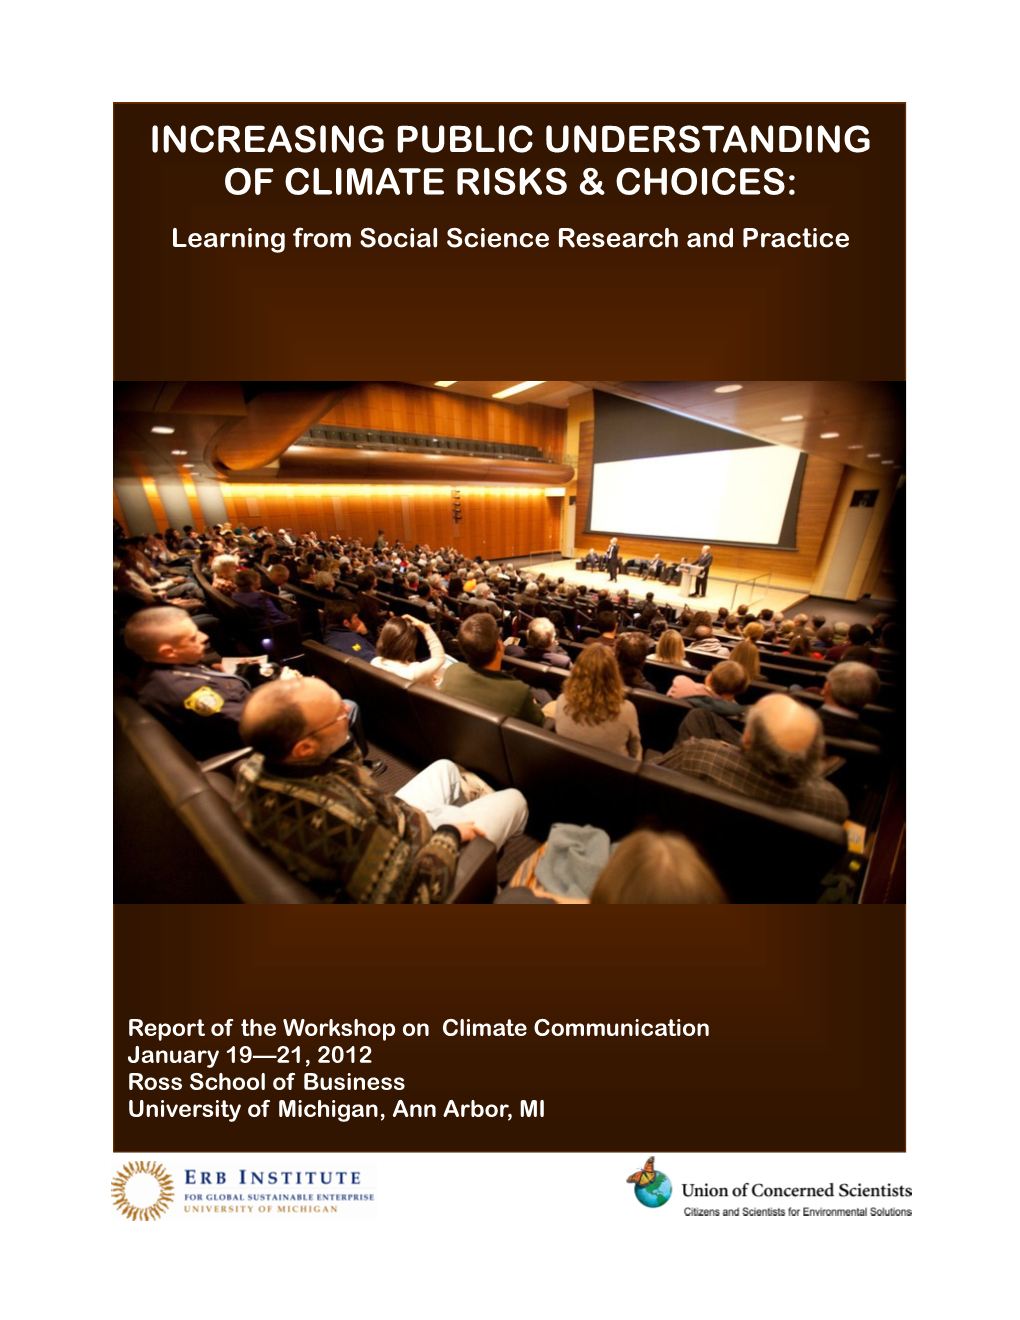 Increasing Public Understanding of Climate Risks & Choices